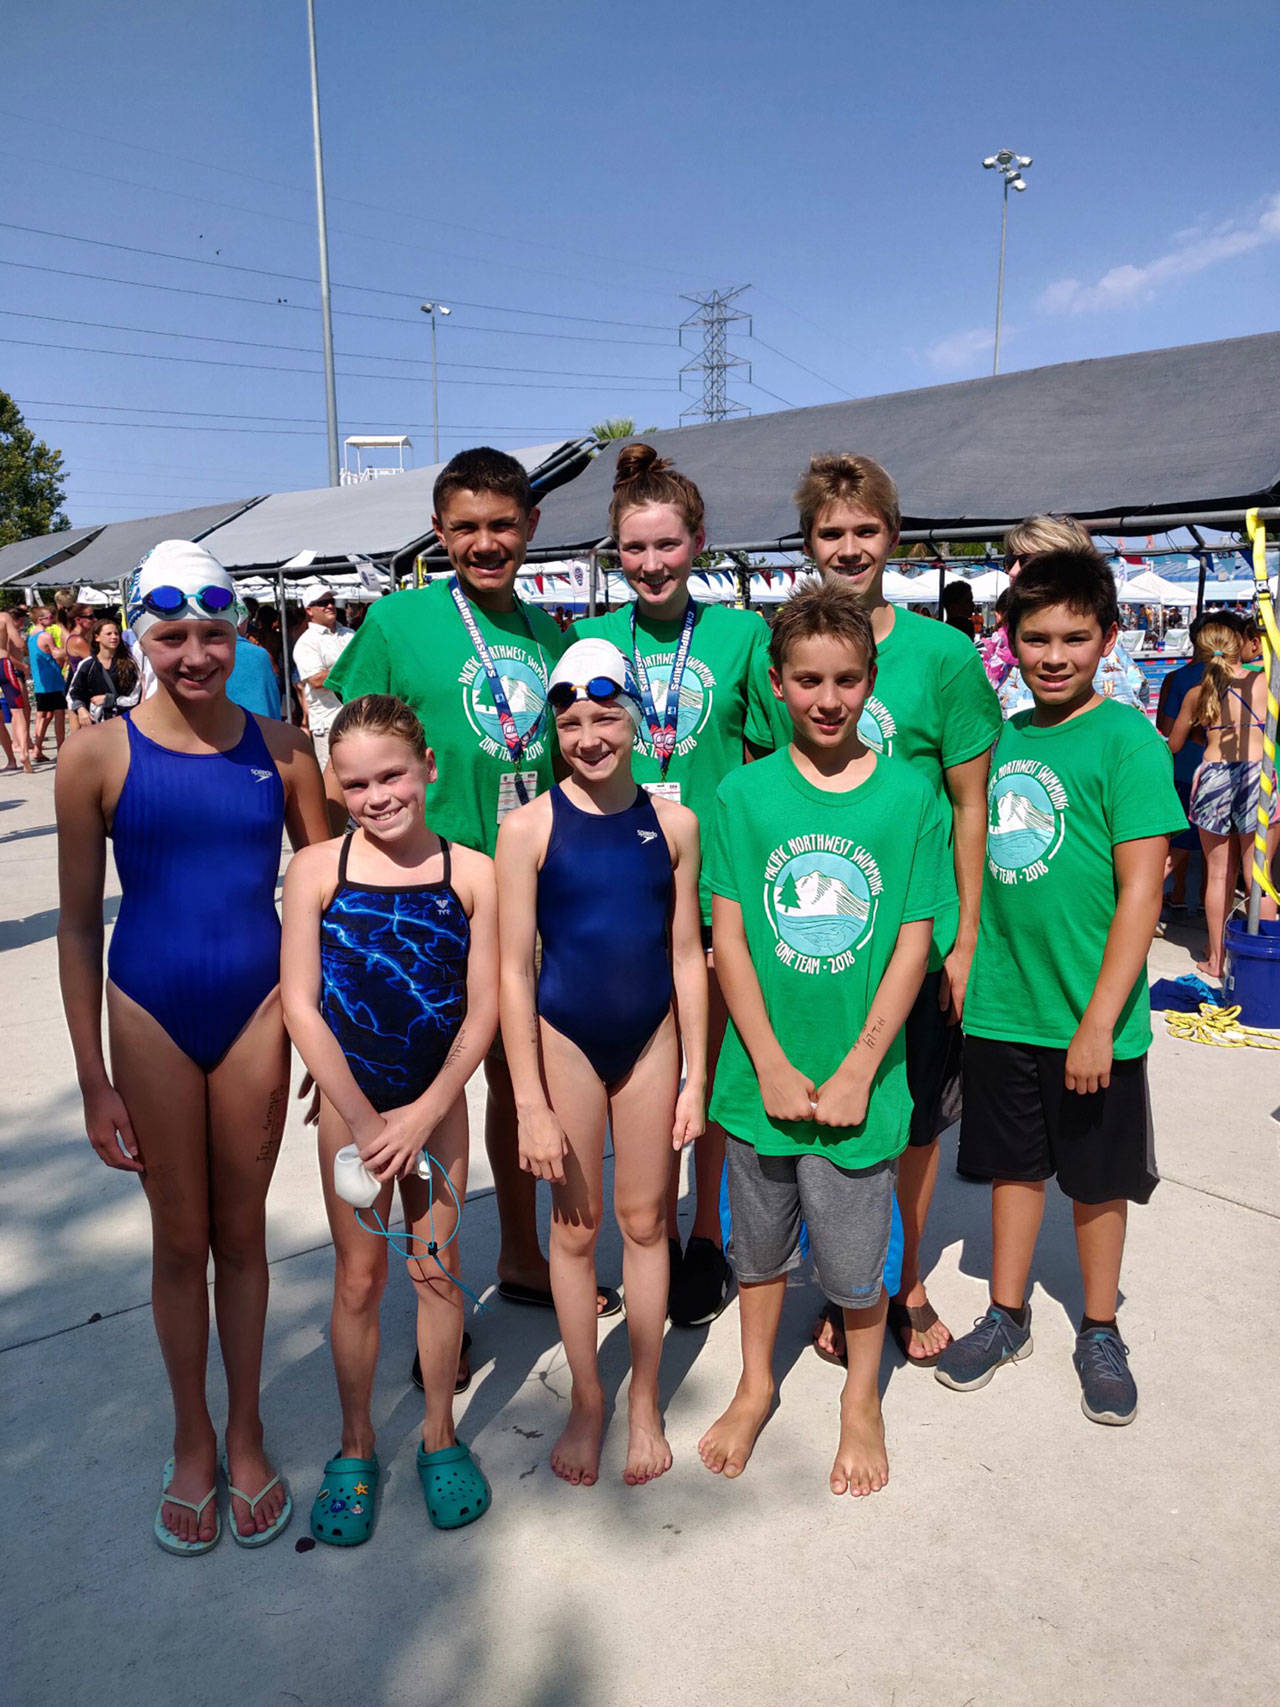 Members of the Bainbridge Island Swim Club gather for a photo at the Western Zone Swimming Championships.